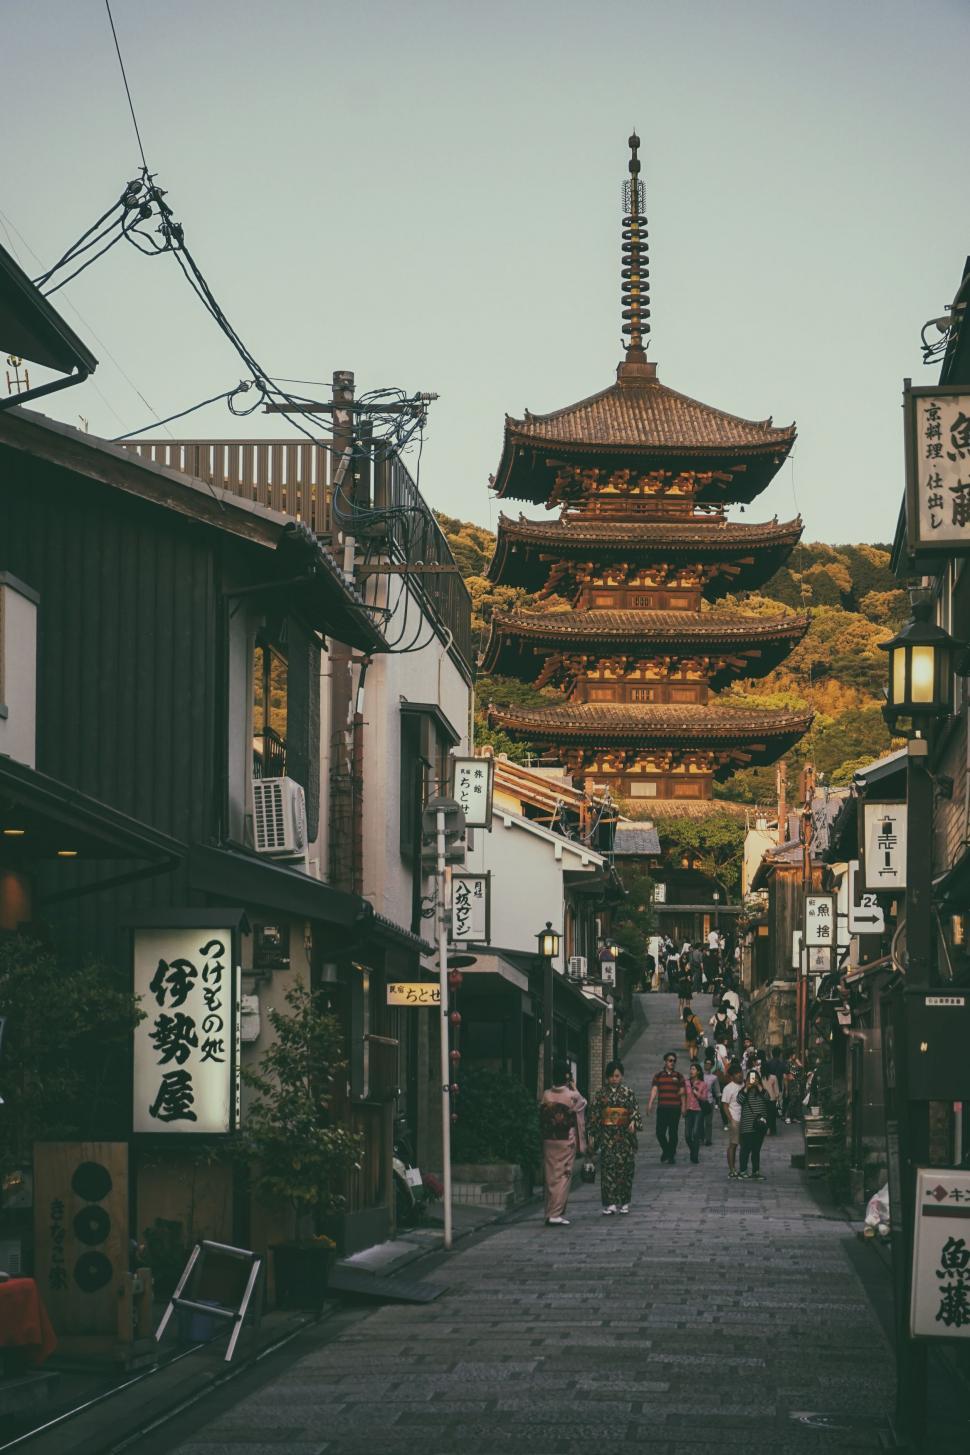 Free Image of Narrow Street With Pagoda in Background 